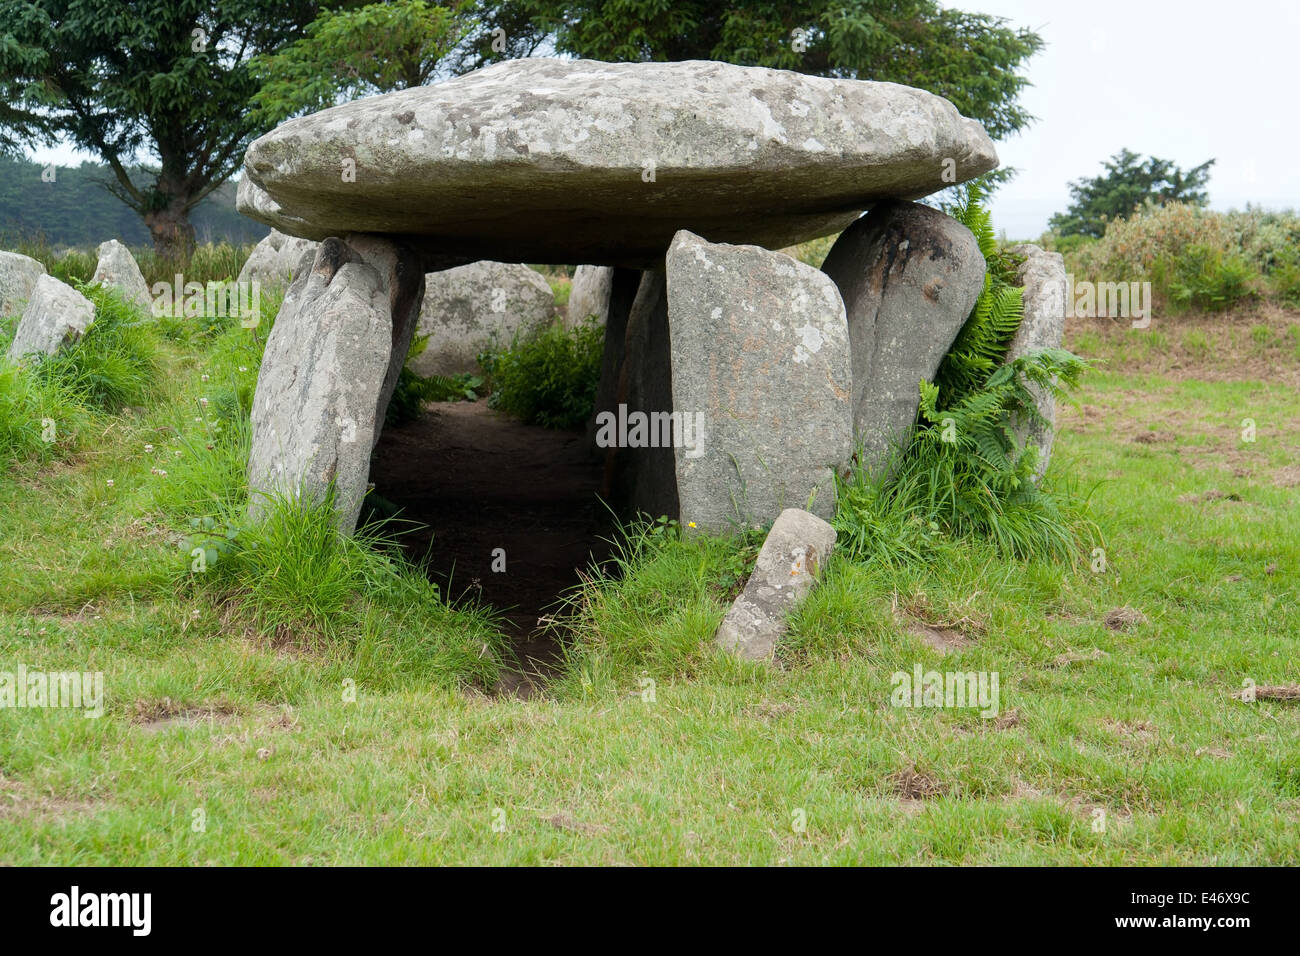 Gallery grave at Ile-Grande in Brittany, France Stock Photo